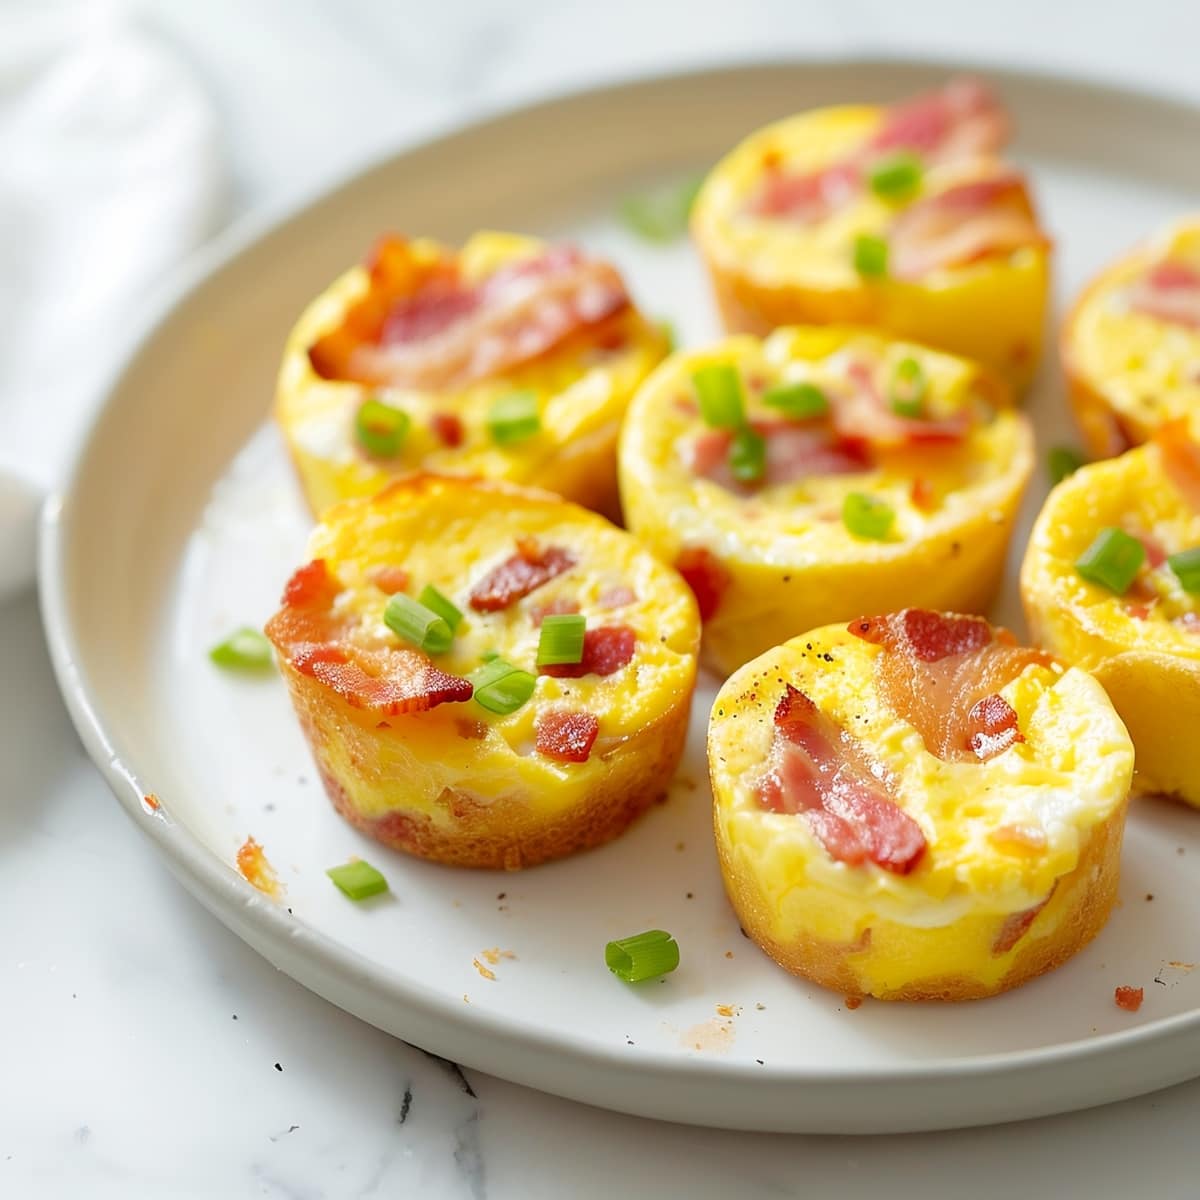 Homemade bacon and egg muffins topped with green onions